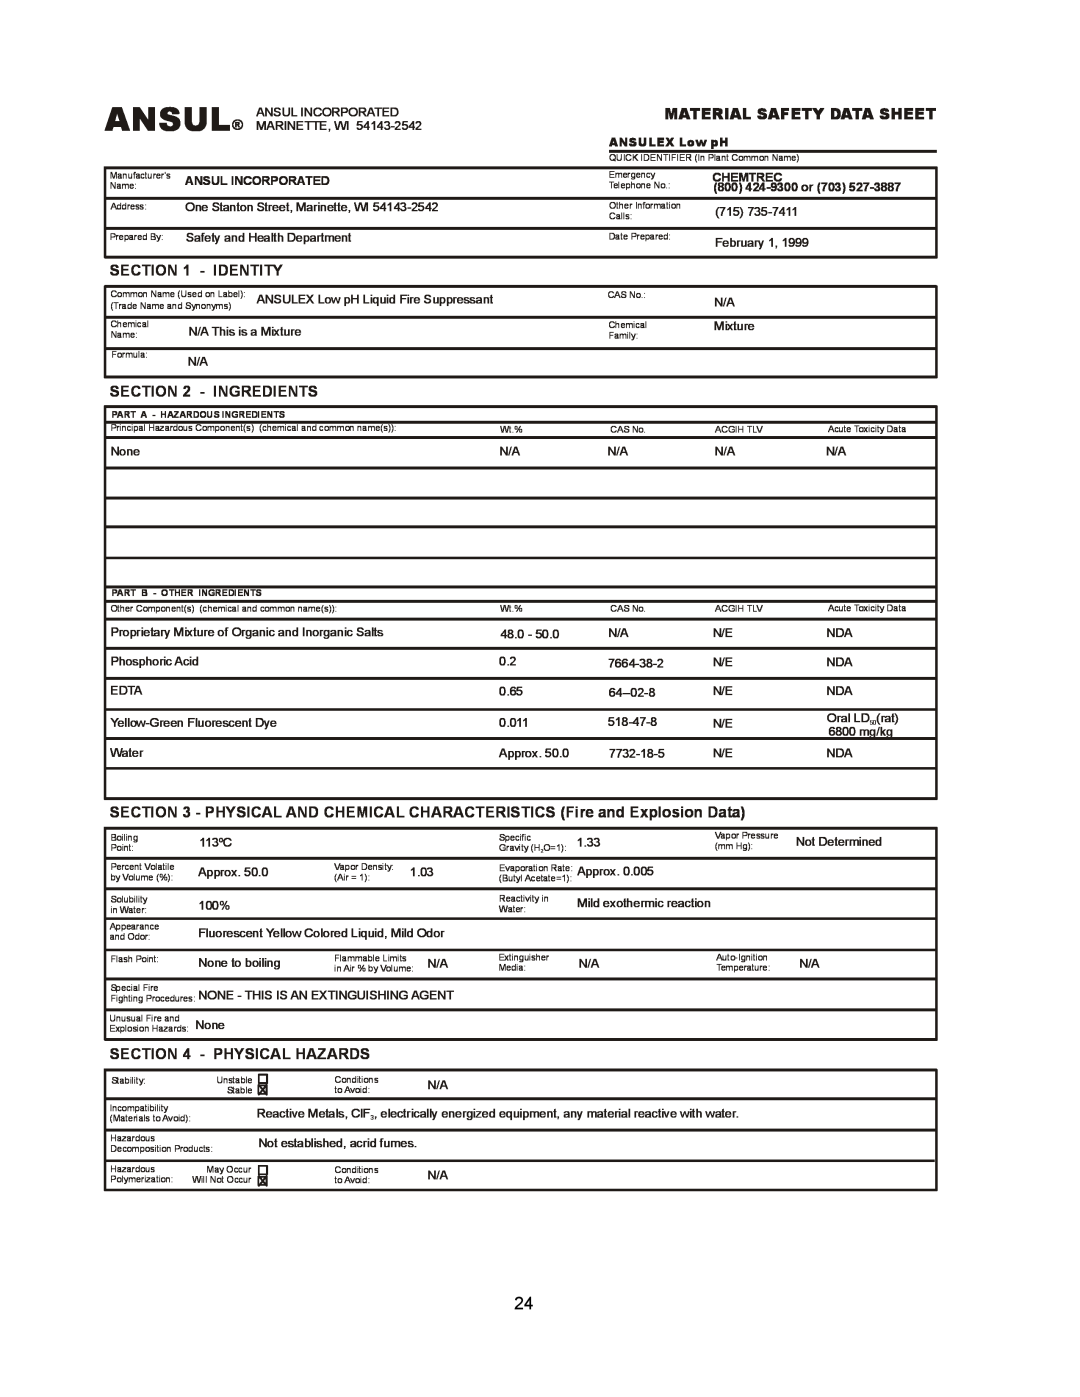 Wells WV-2HGRW Ansul, Identity, Ingredients, Physical Hazards, Material Safety Data Sheet, ANSULEX Low pH, Chemtrec 